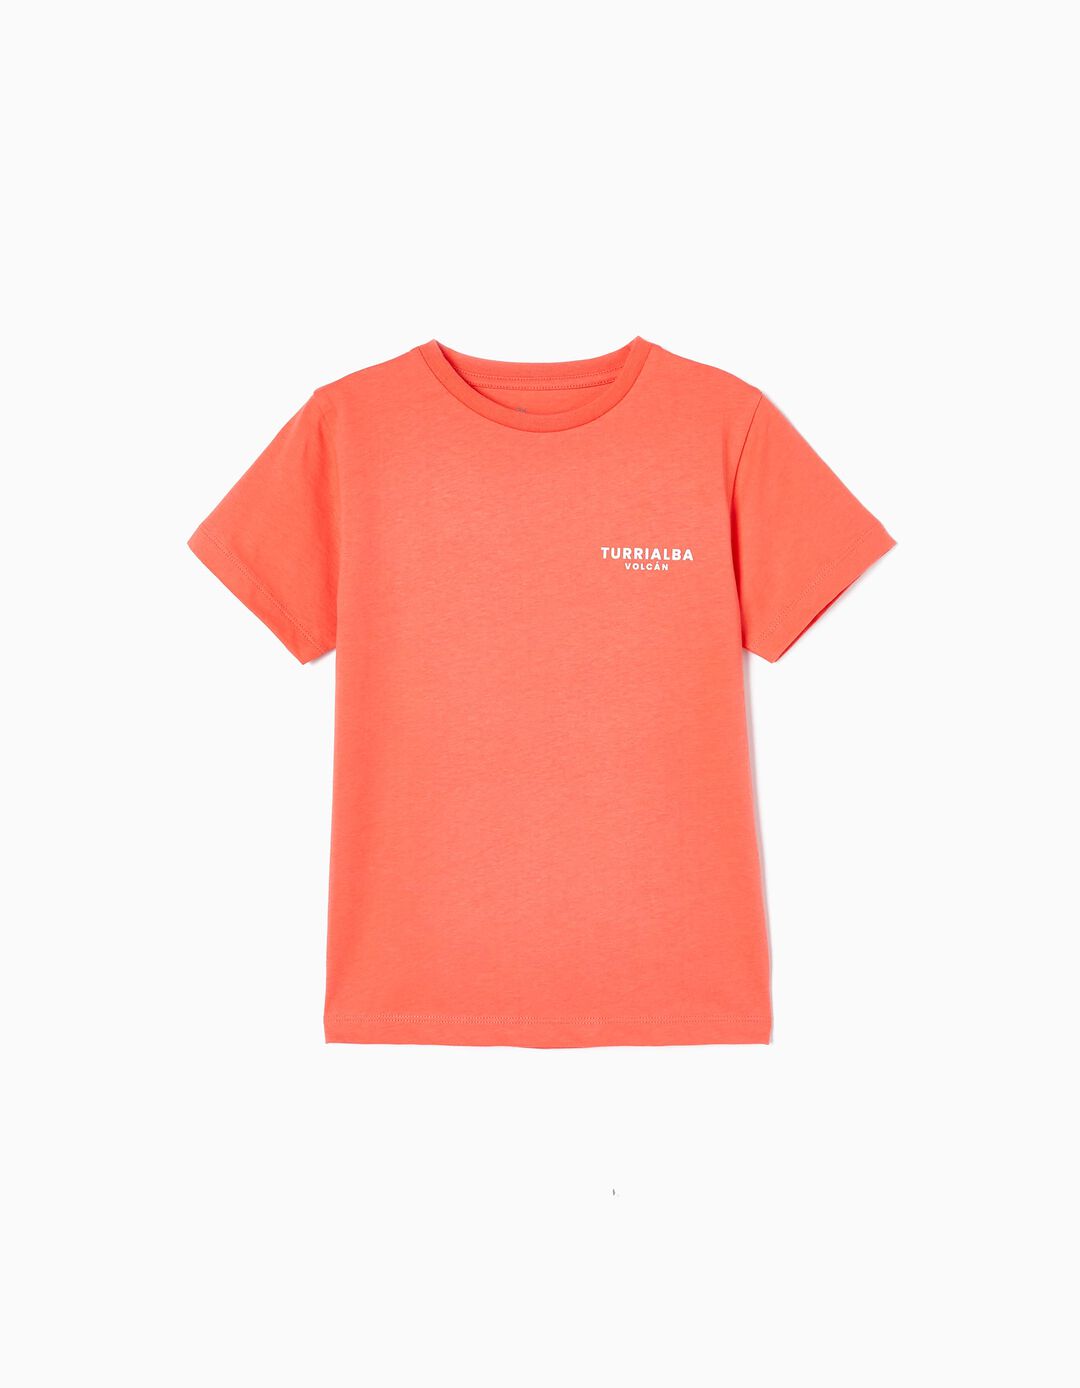 Cotton T-shirt for Boys 'Turrialba', Coral